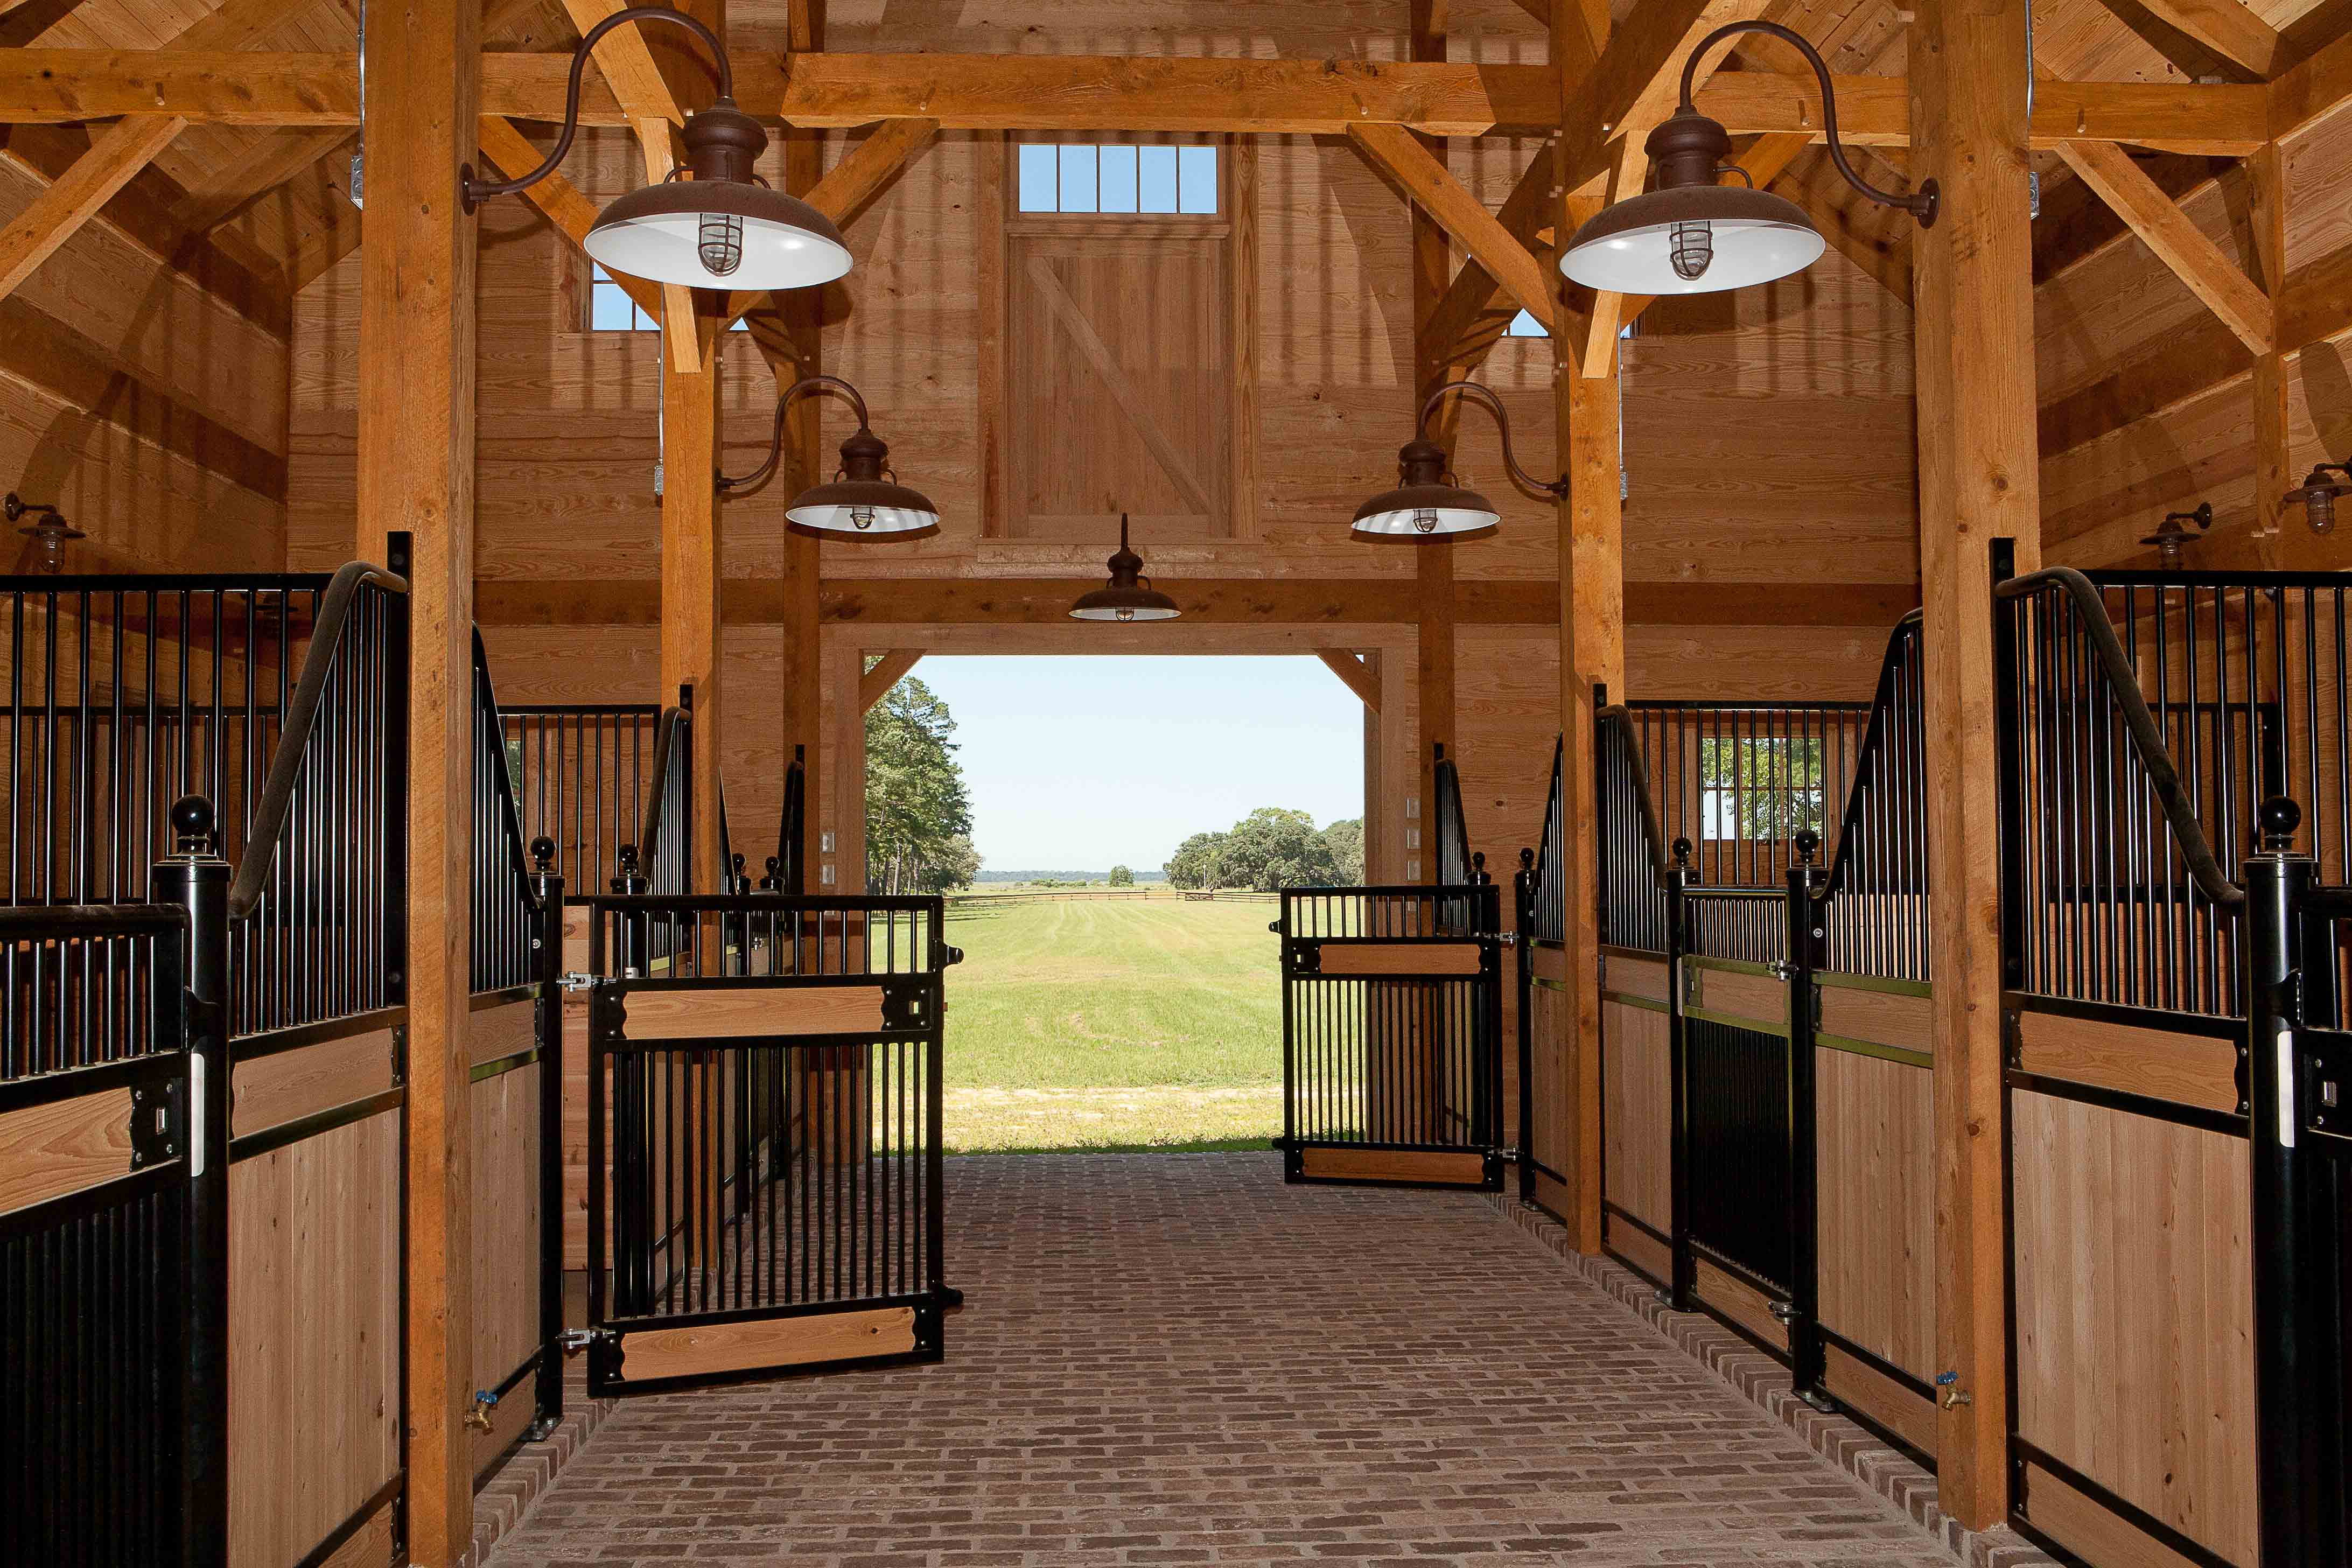 Beutiful Pics Of Barns And Horses / The Most Luxurious ...